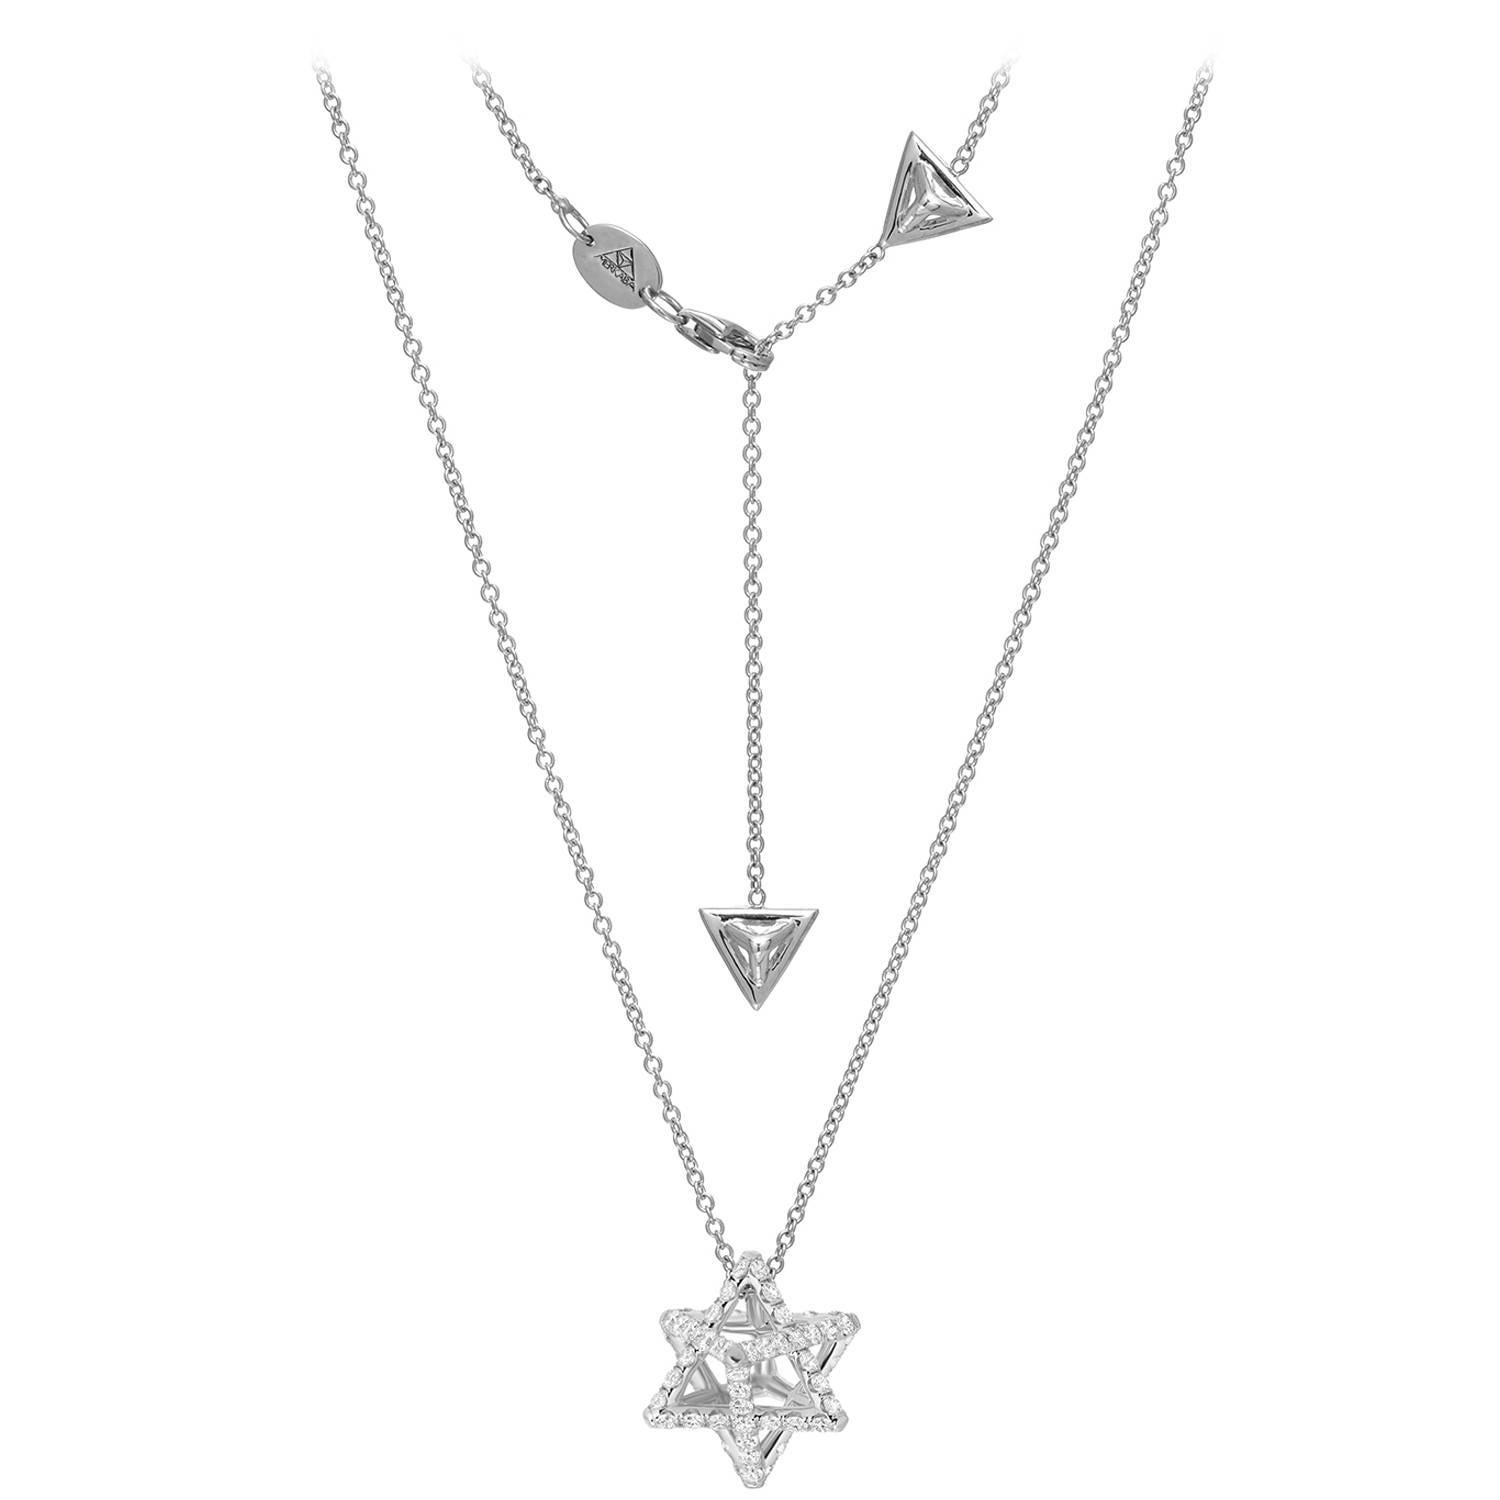 Merkaba Star, platinum pendant necklace, featuring a total of approximately 1.12 carats round brilliant collection diamonds. This heirloom-quality, sacred geometric jewelry piece suspends elegantly at the chest, measuring 0.68 inches, a